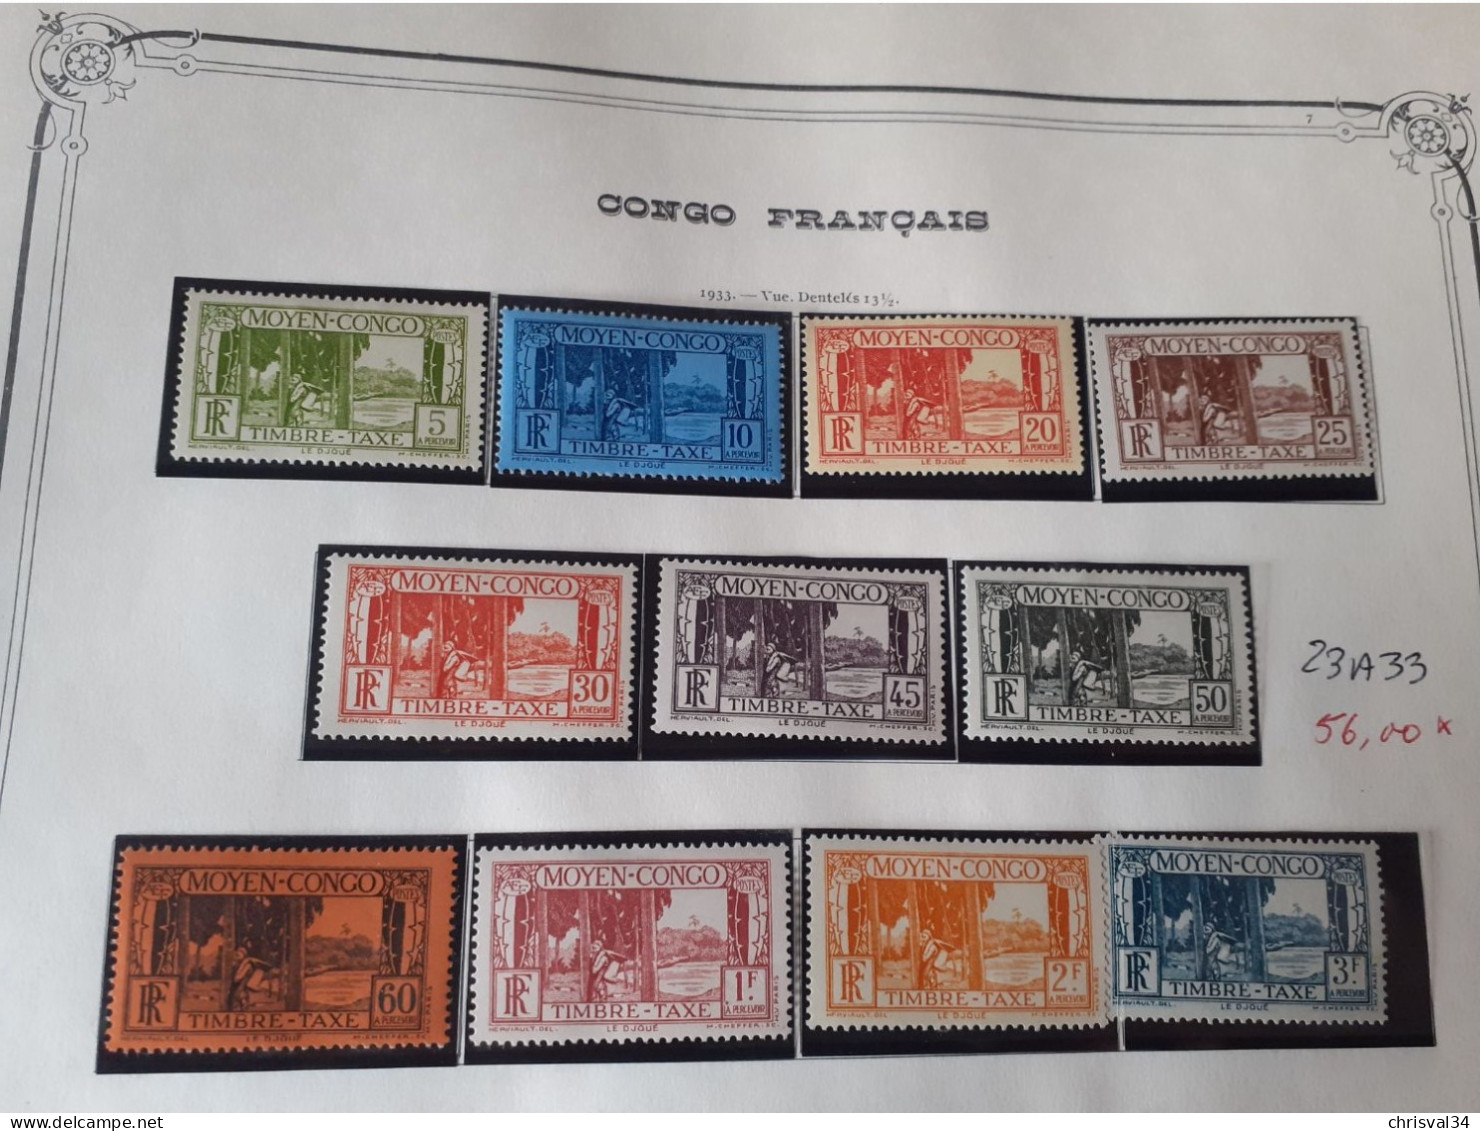 TIMBRES  CONGO SERIE  TAXE   N  23  A  33     COTE  56,00  EUROS    NEUFS  TRACE  CHARNIERES - Ungebraucht